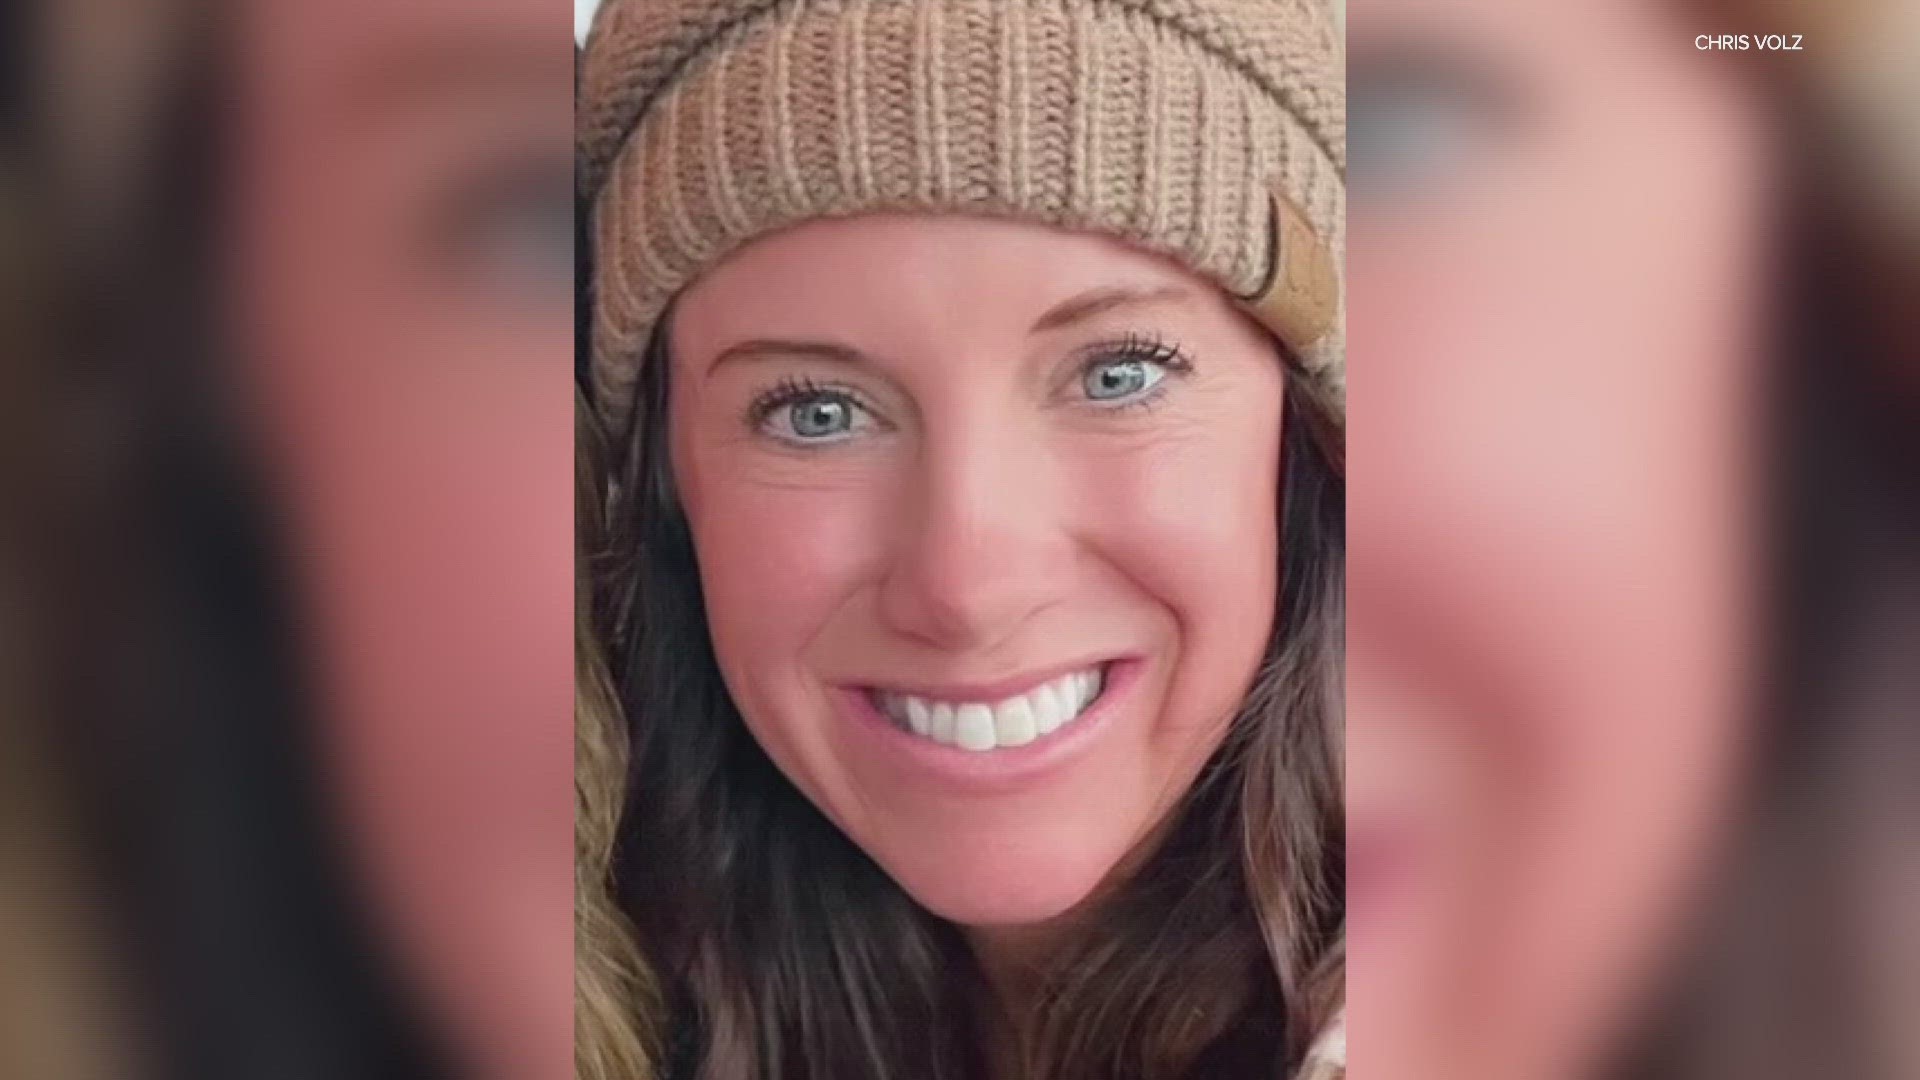 Stefanie Smith was on a flight headed for Charlotte, North Carolina, when she suffered a medical emergency and died.